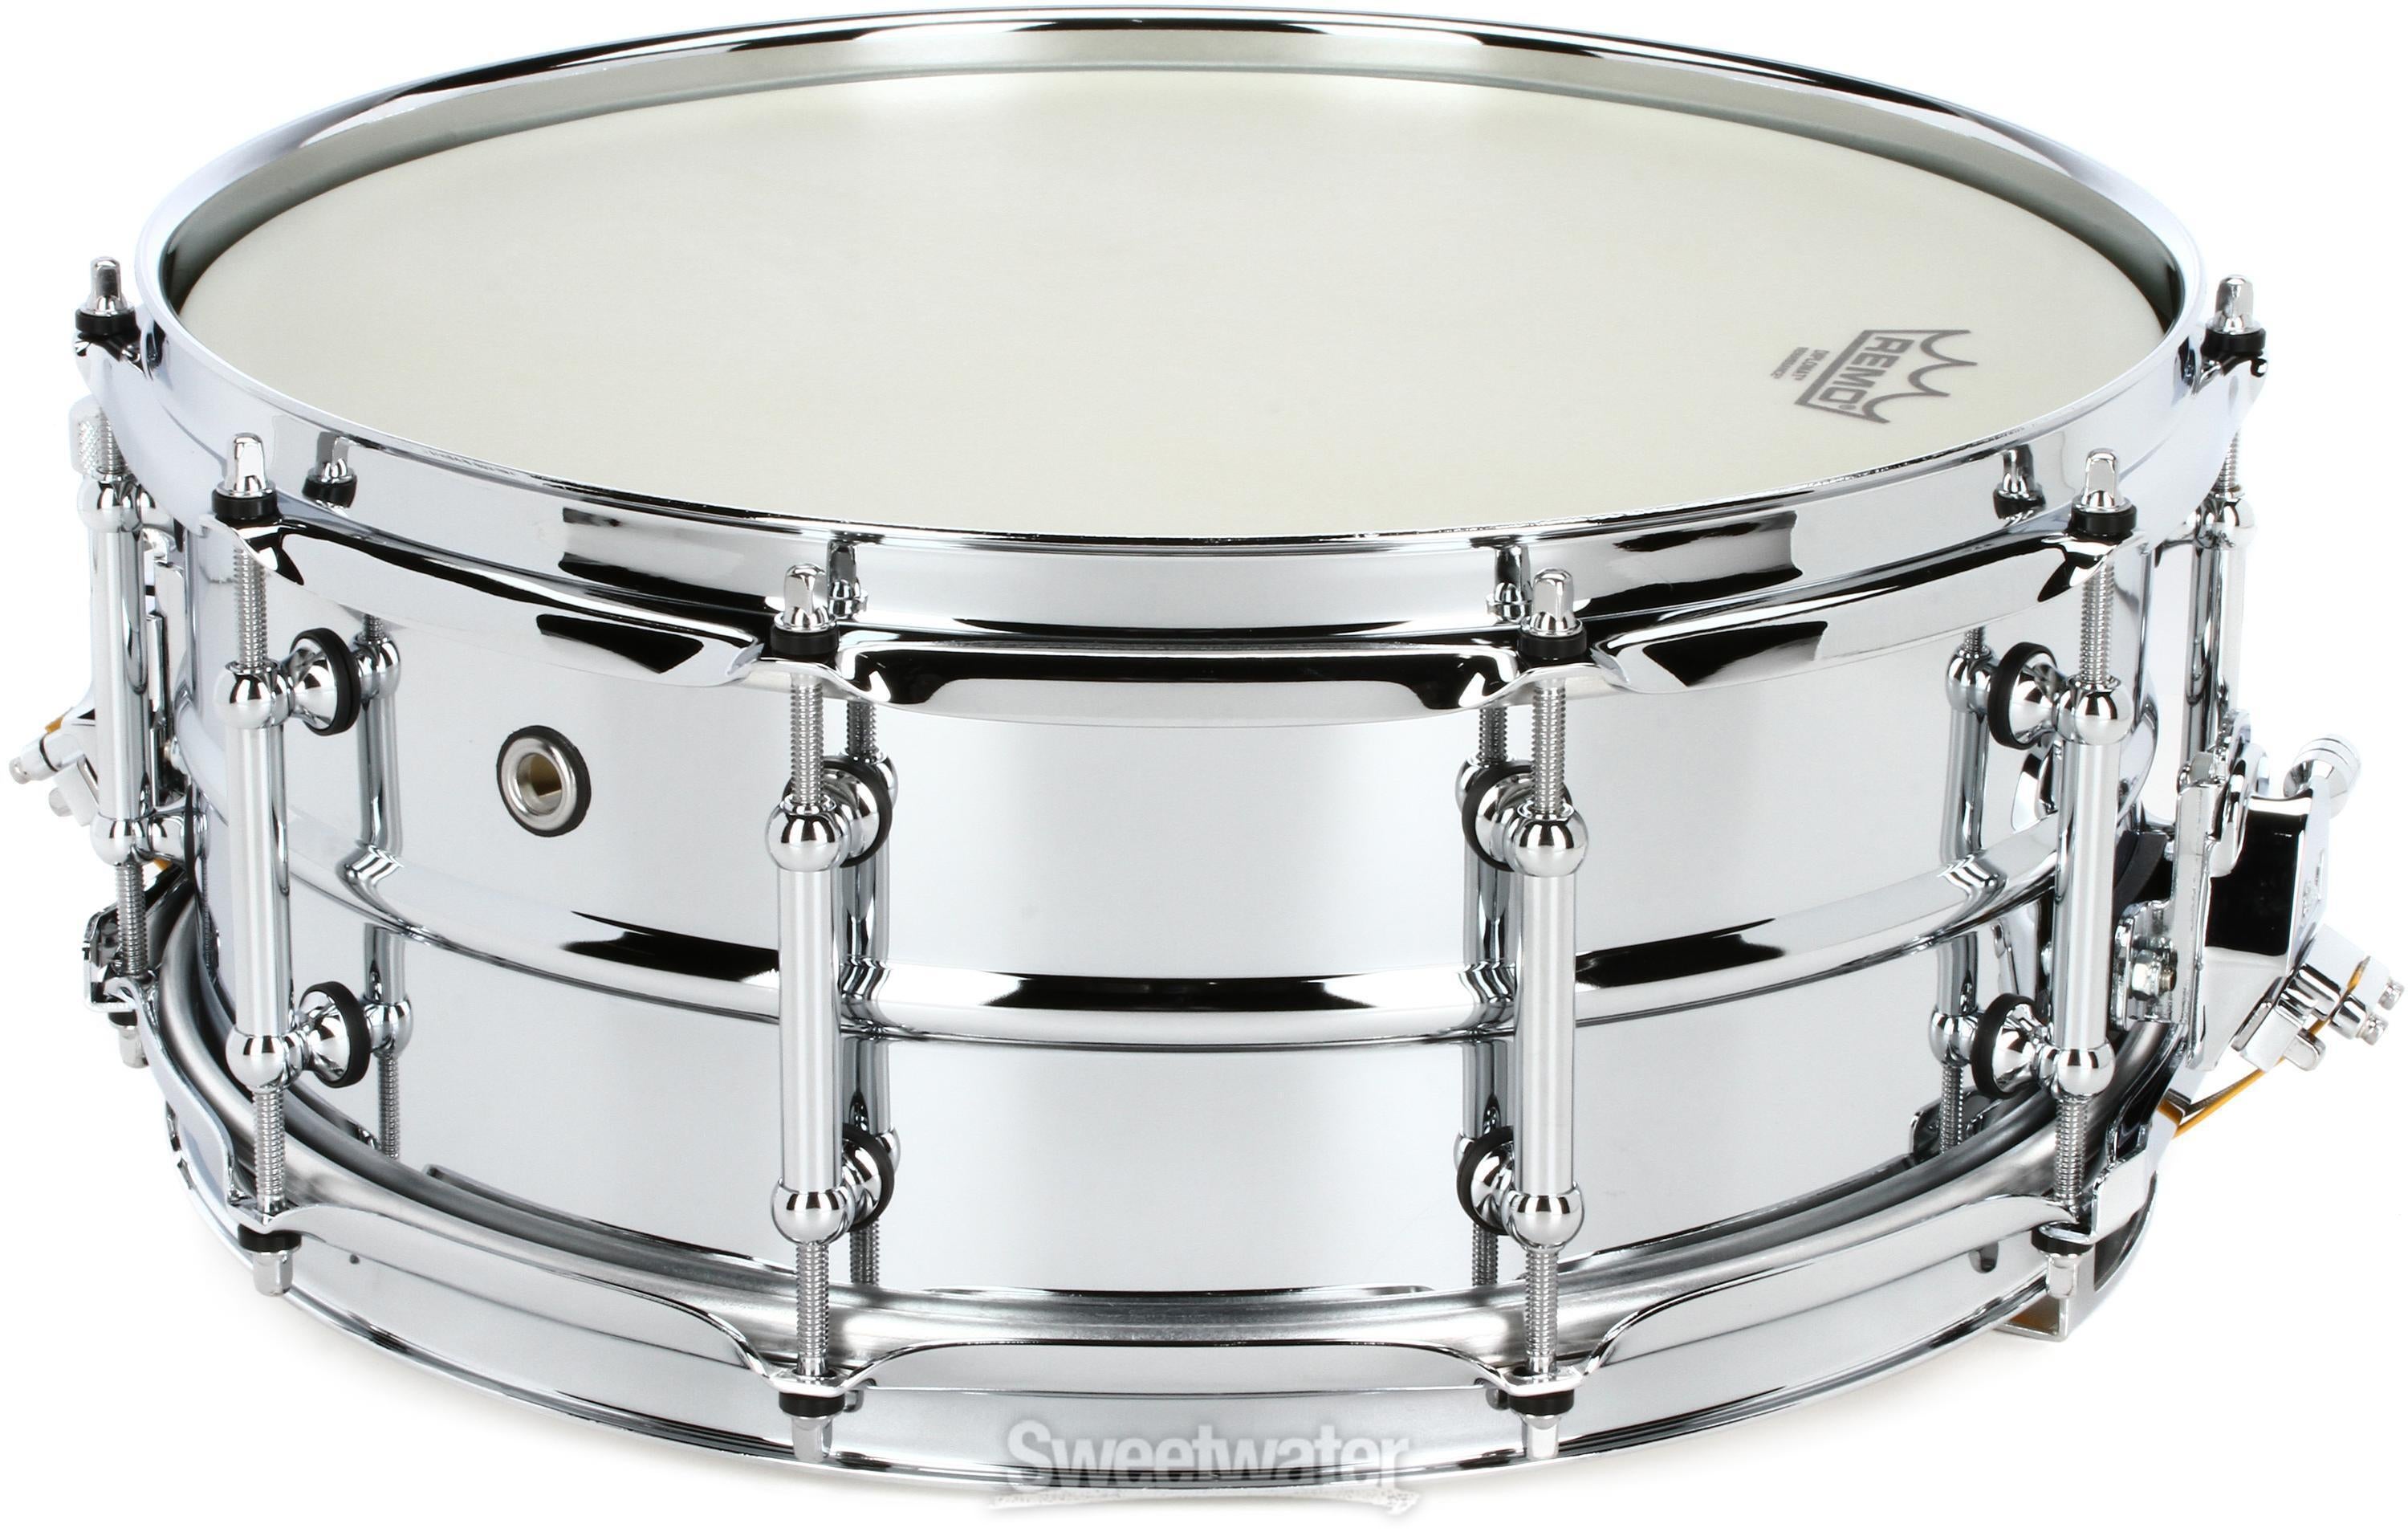 Pearl Concert Steel Snare Drum - 5.5-inch x 14-inch - Chrome